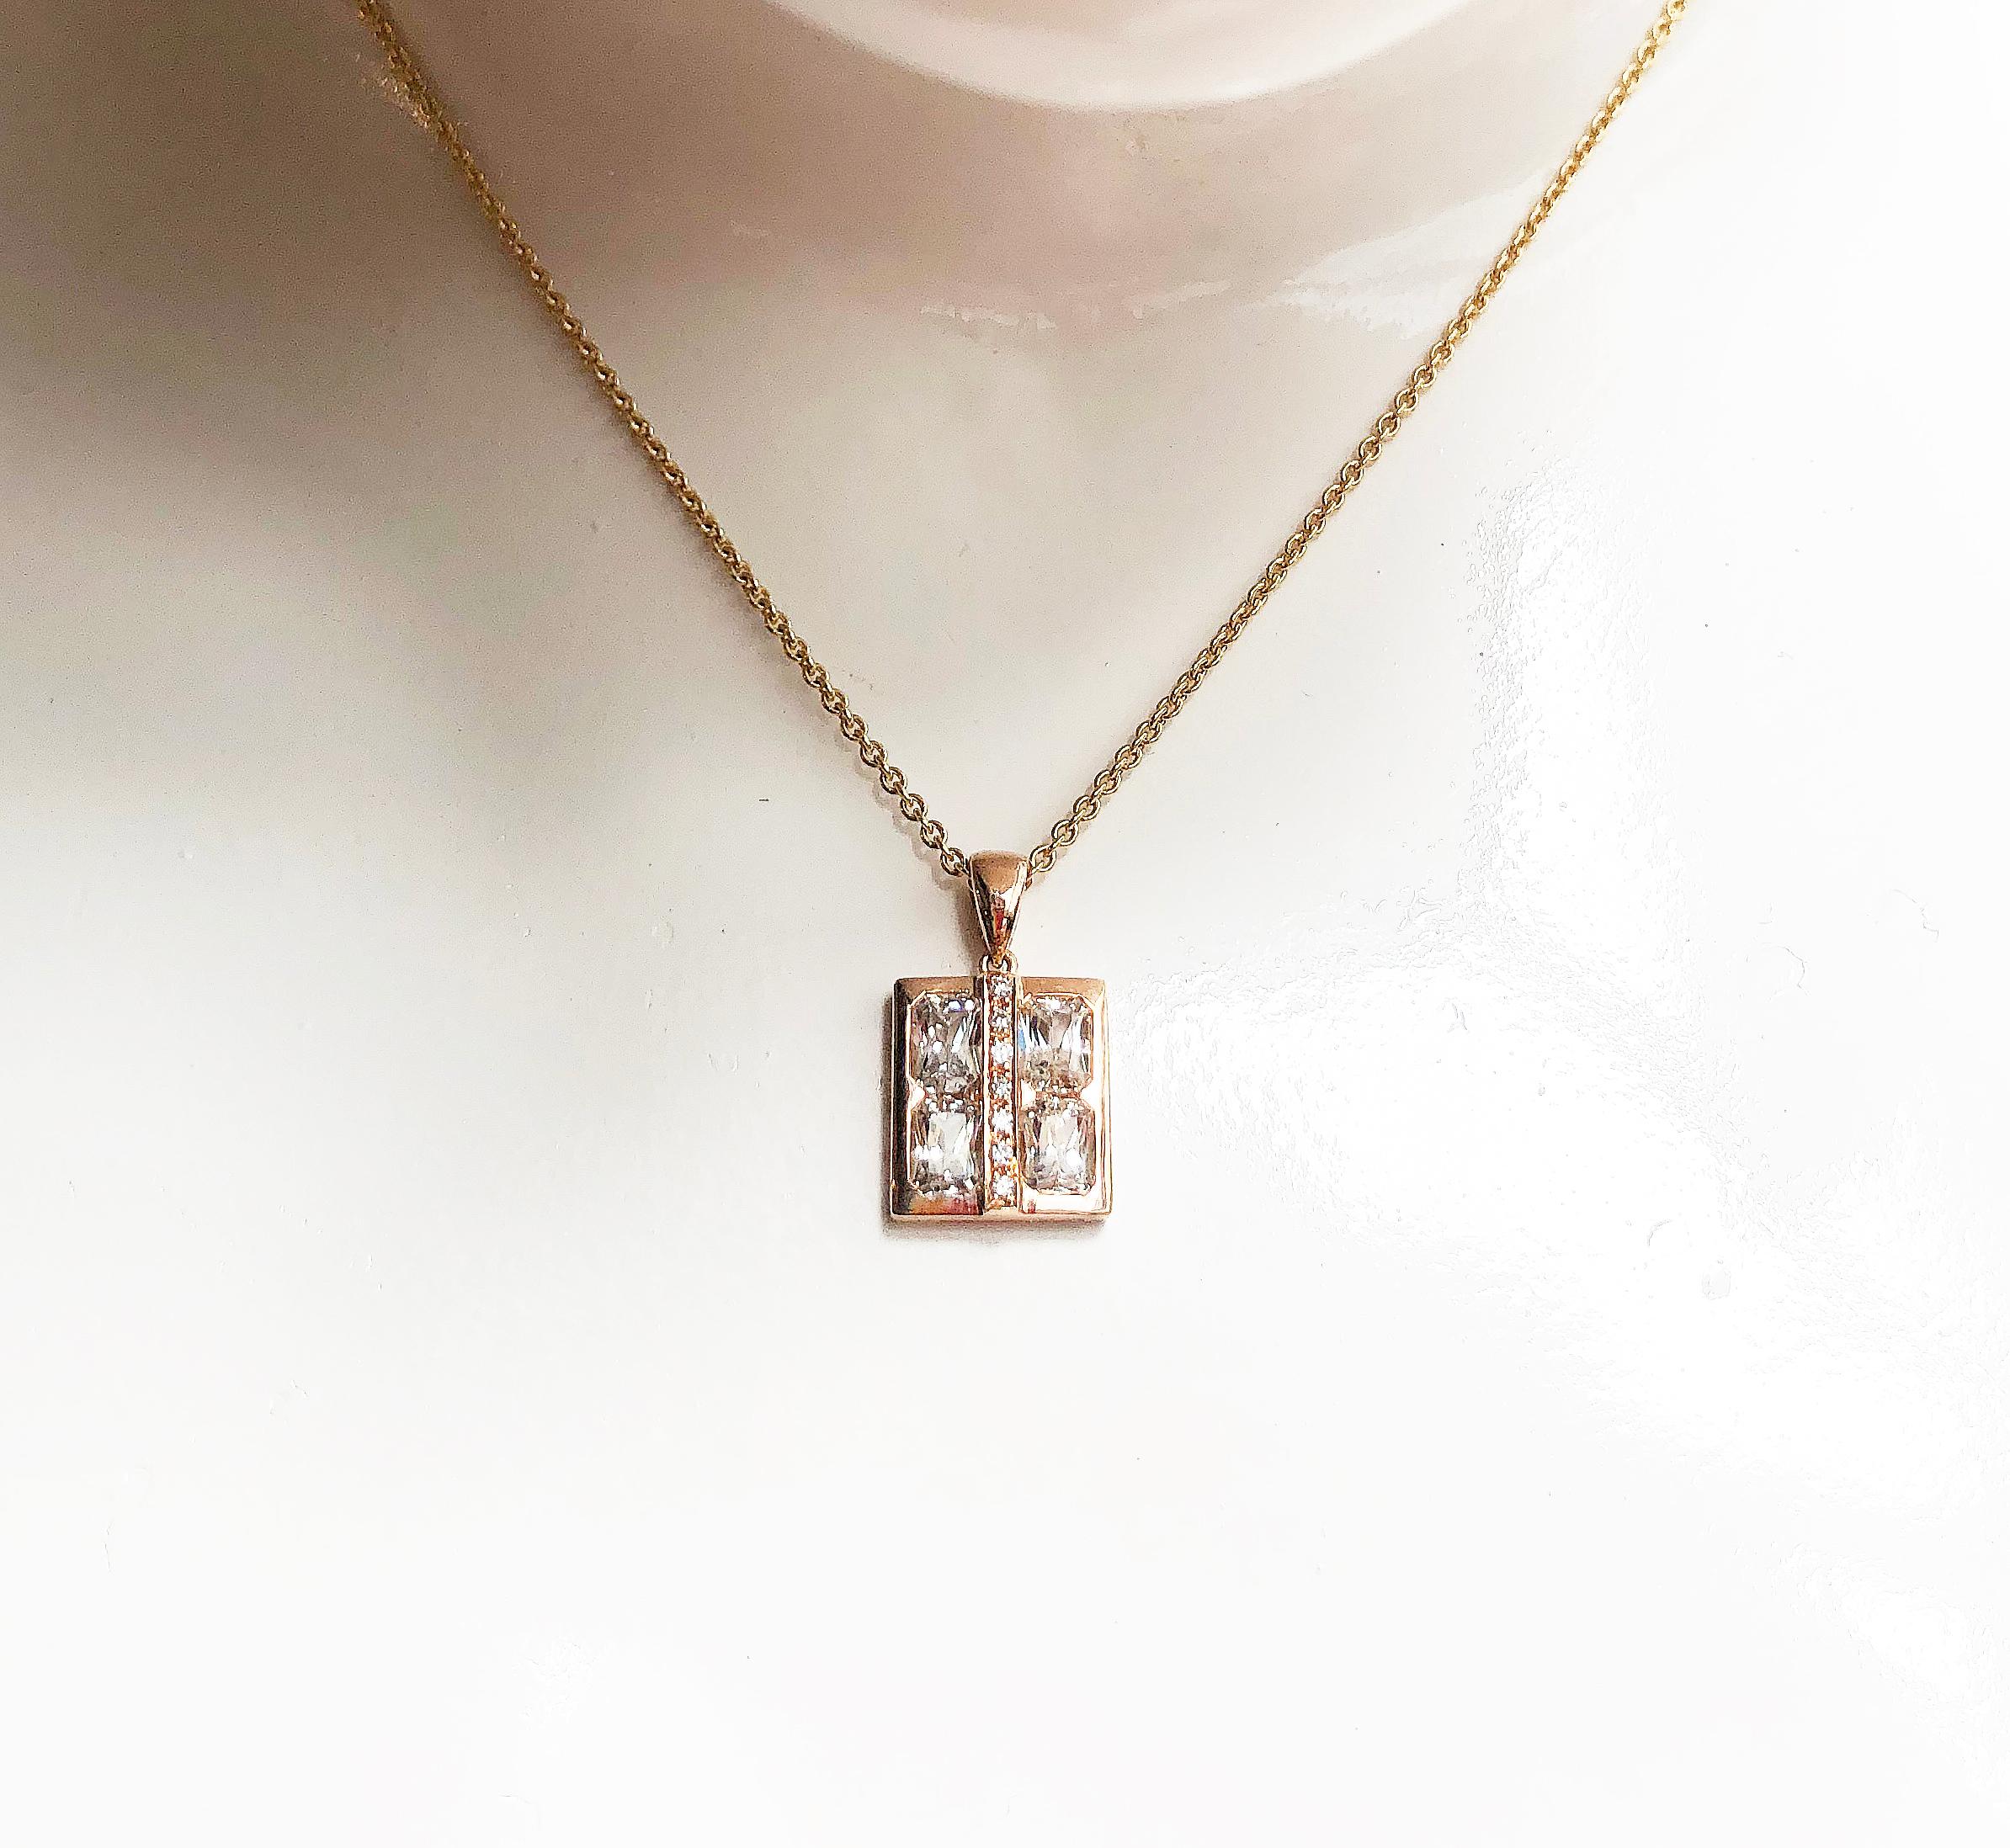 White Sapphire 2.21 carats with Diamond 0.06 carat Pendant set in 18 Karat Rose Gold Settings
(chain not included)

Width: 1.2 cm
Length: 2.0 cm 

